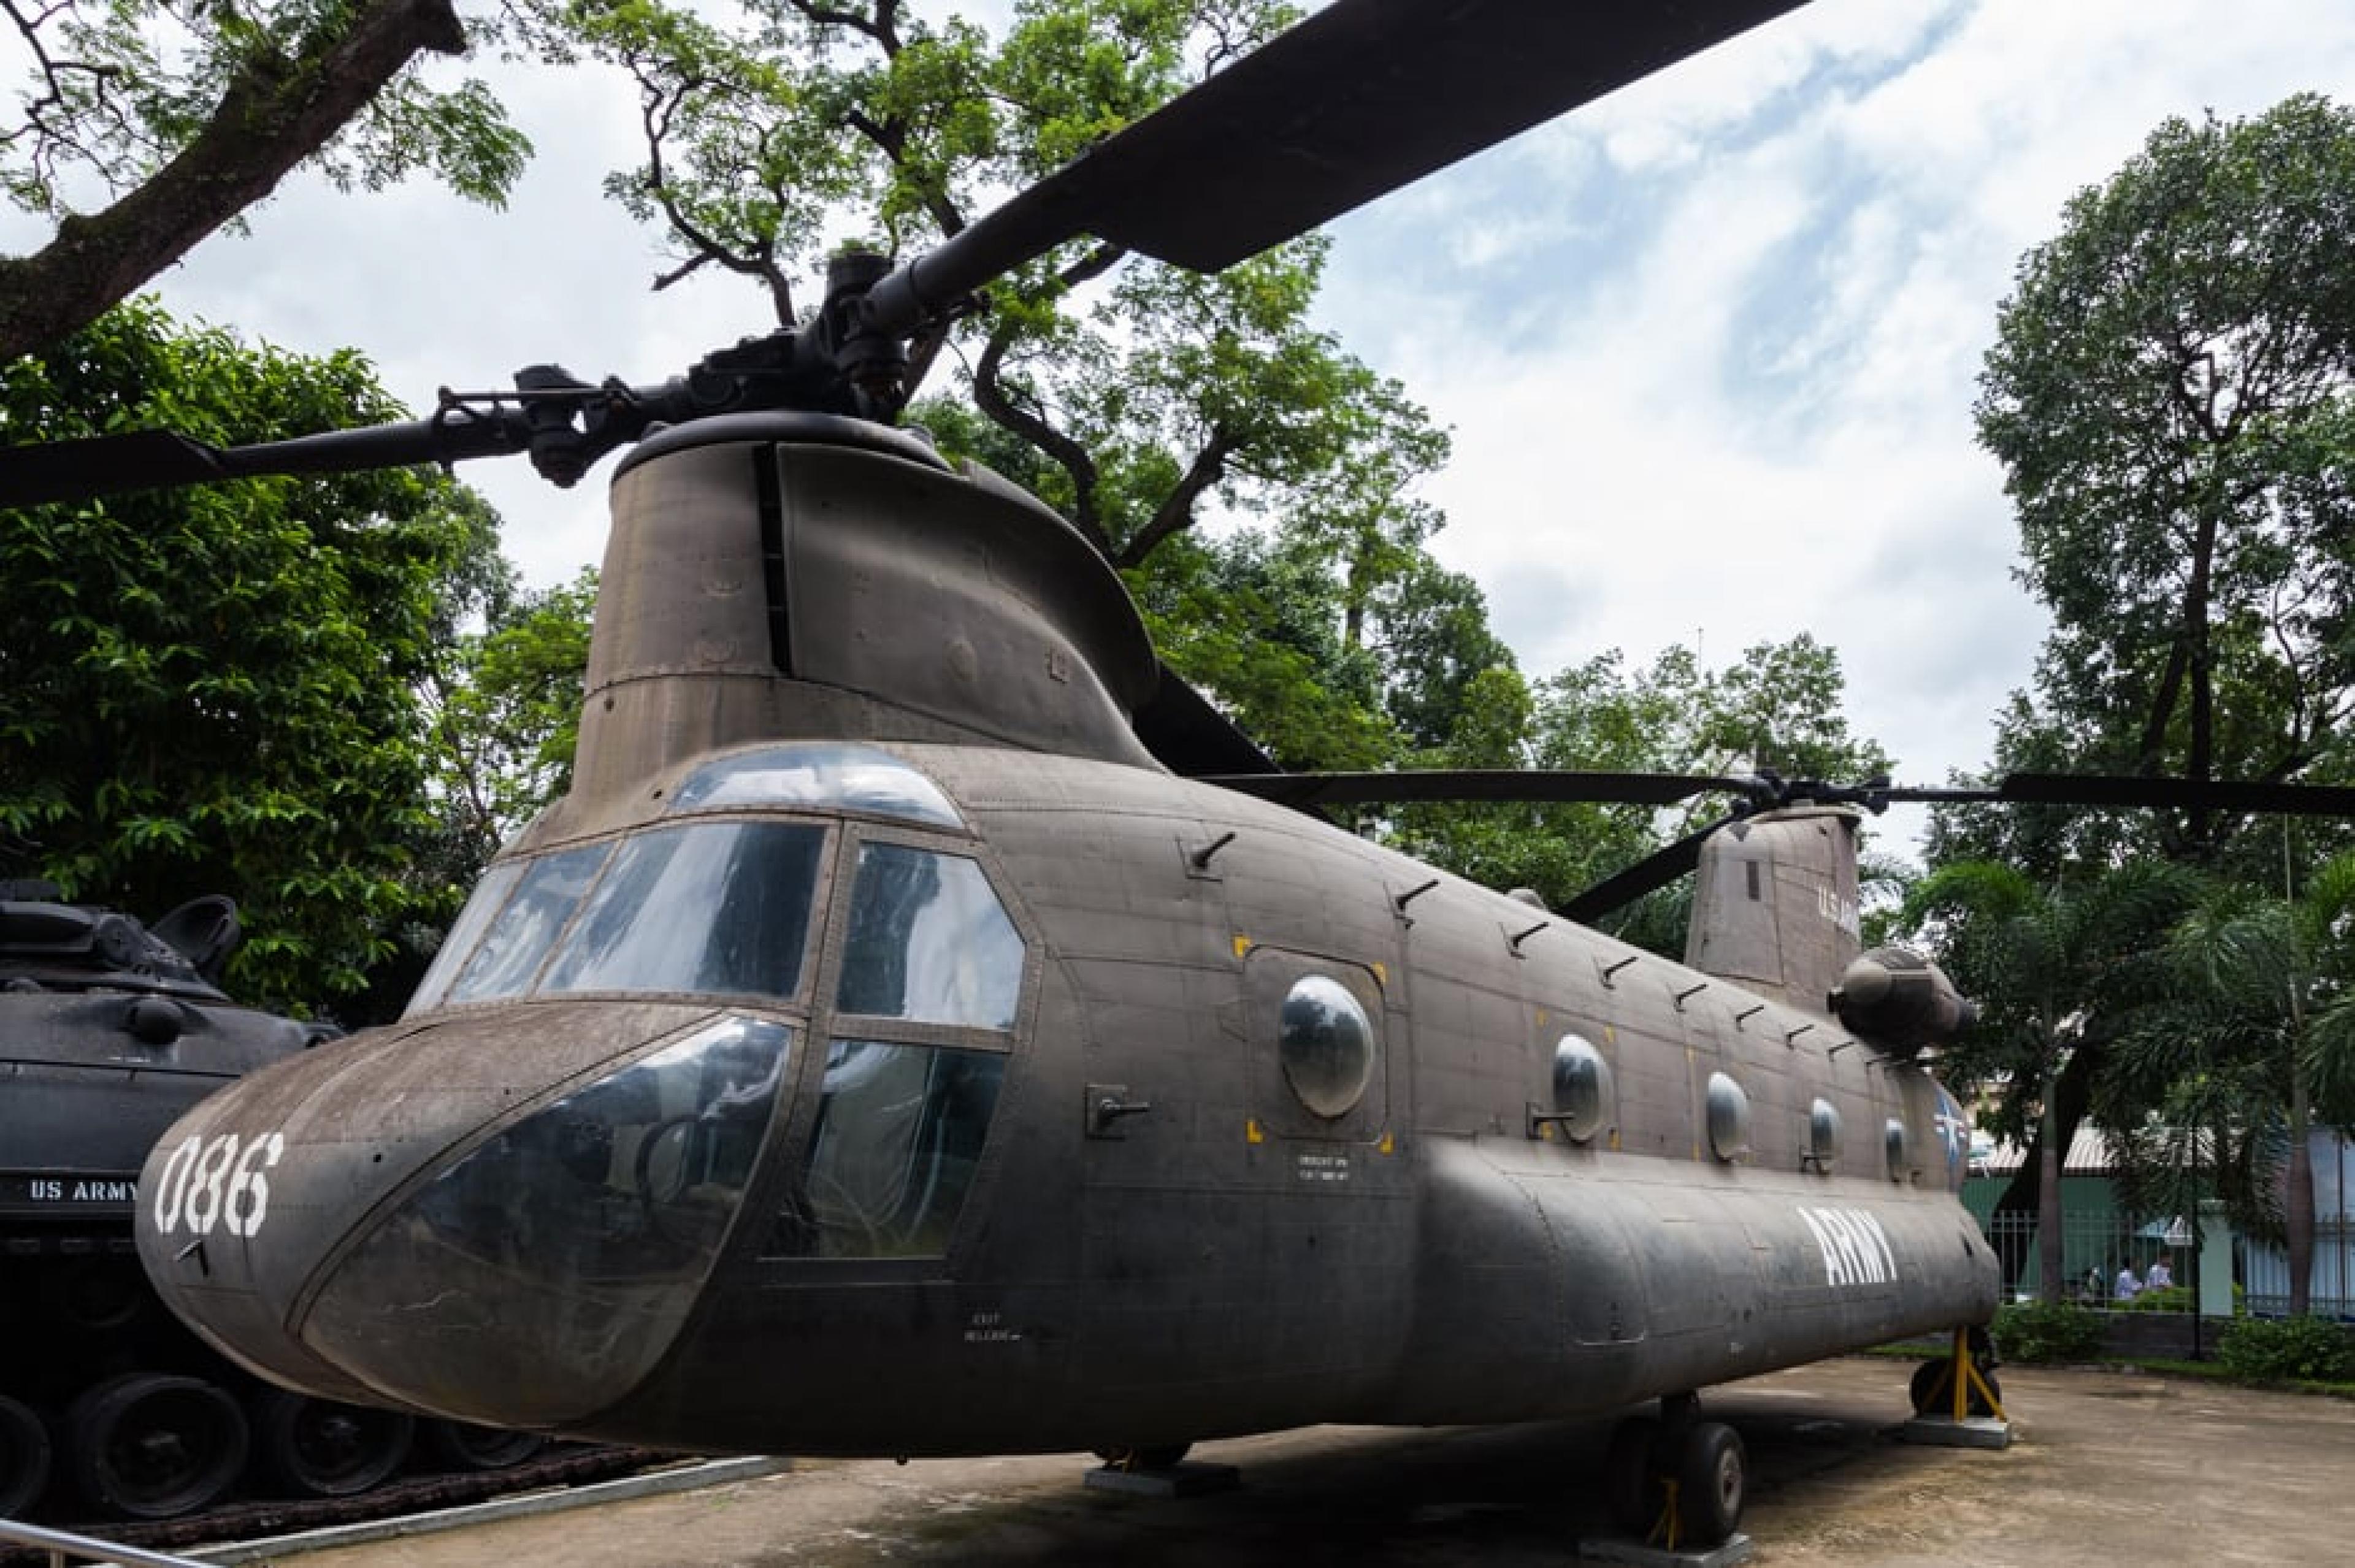 exterior Veiw helicopter -War Remnants Museum ,Ho Chi Minh City, Vietnam , Courtesy Diego Delso